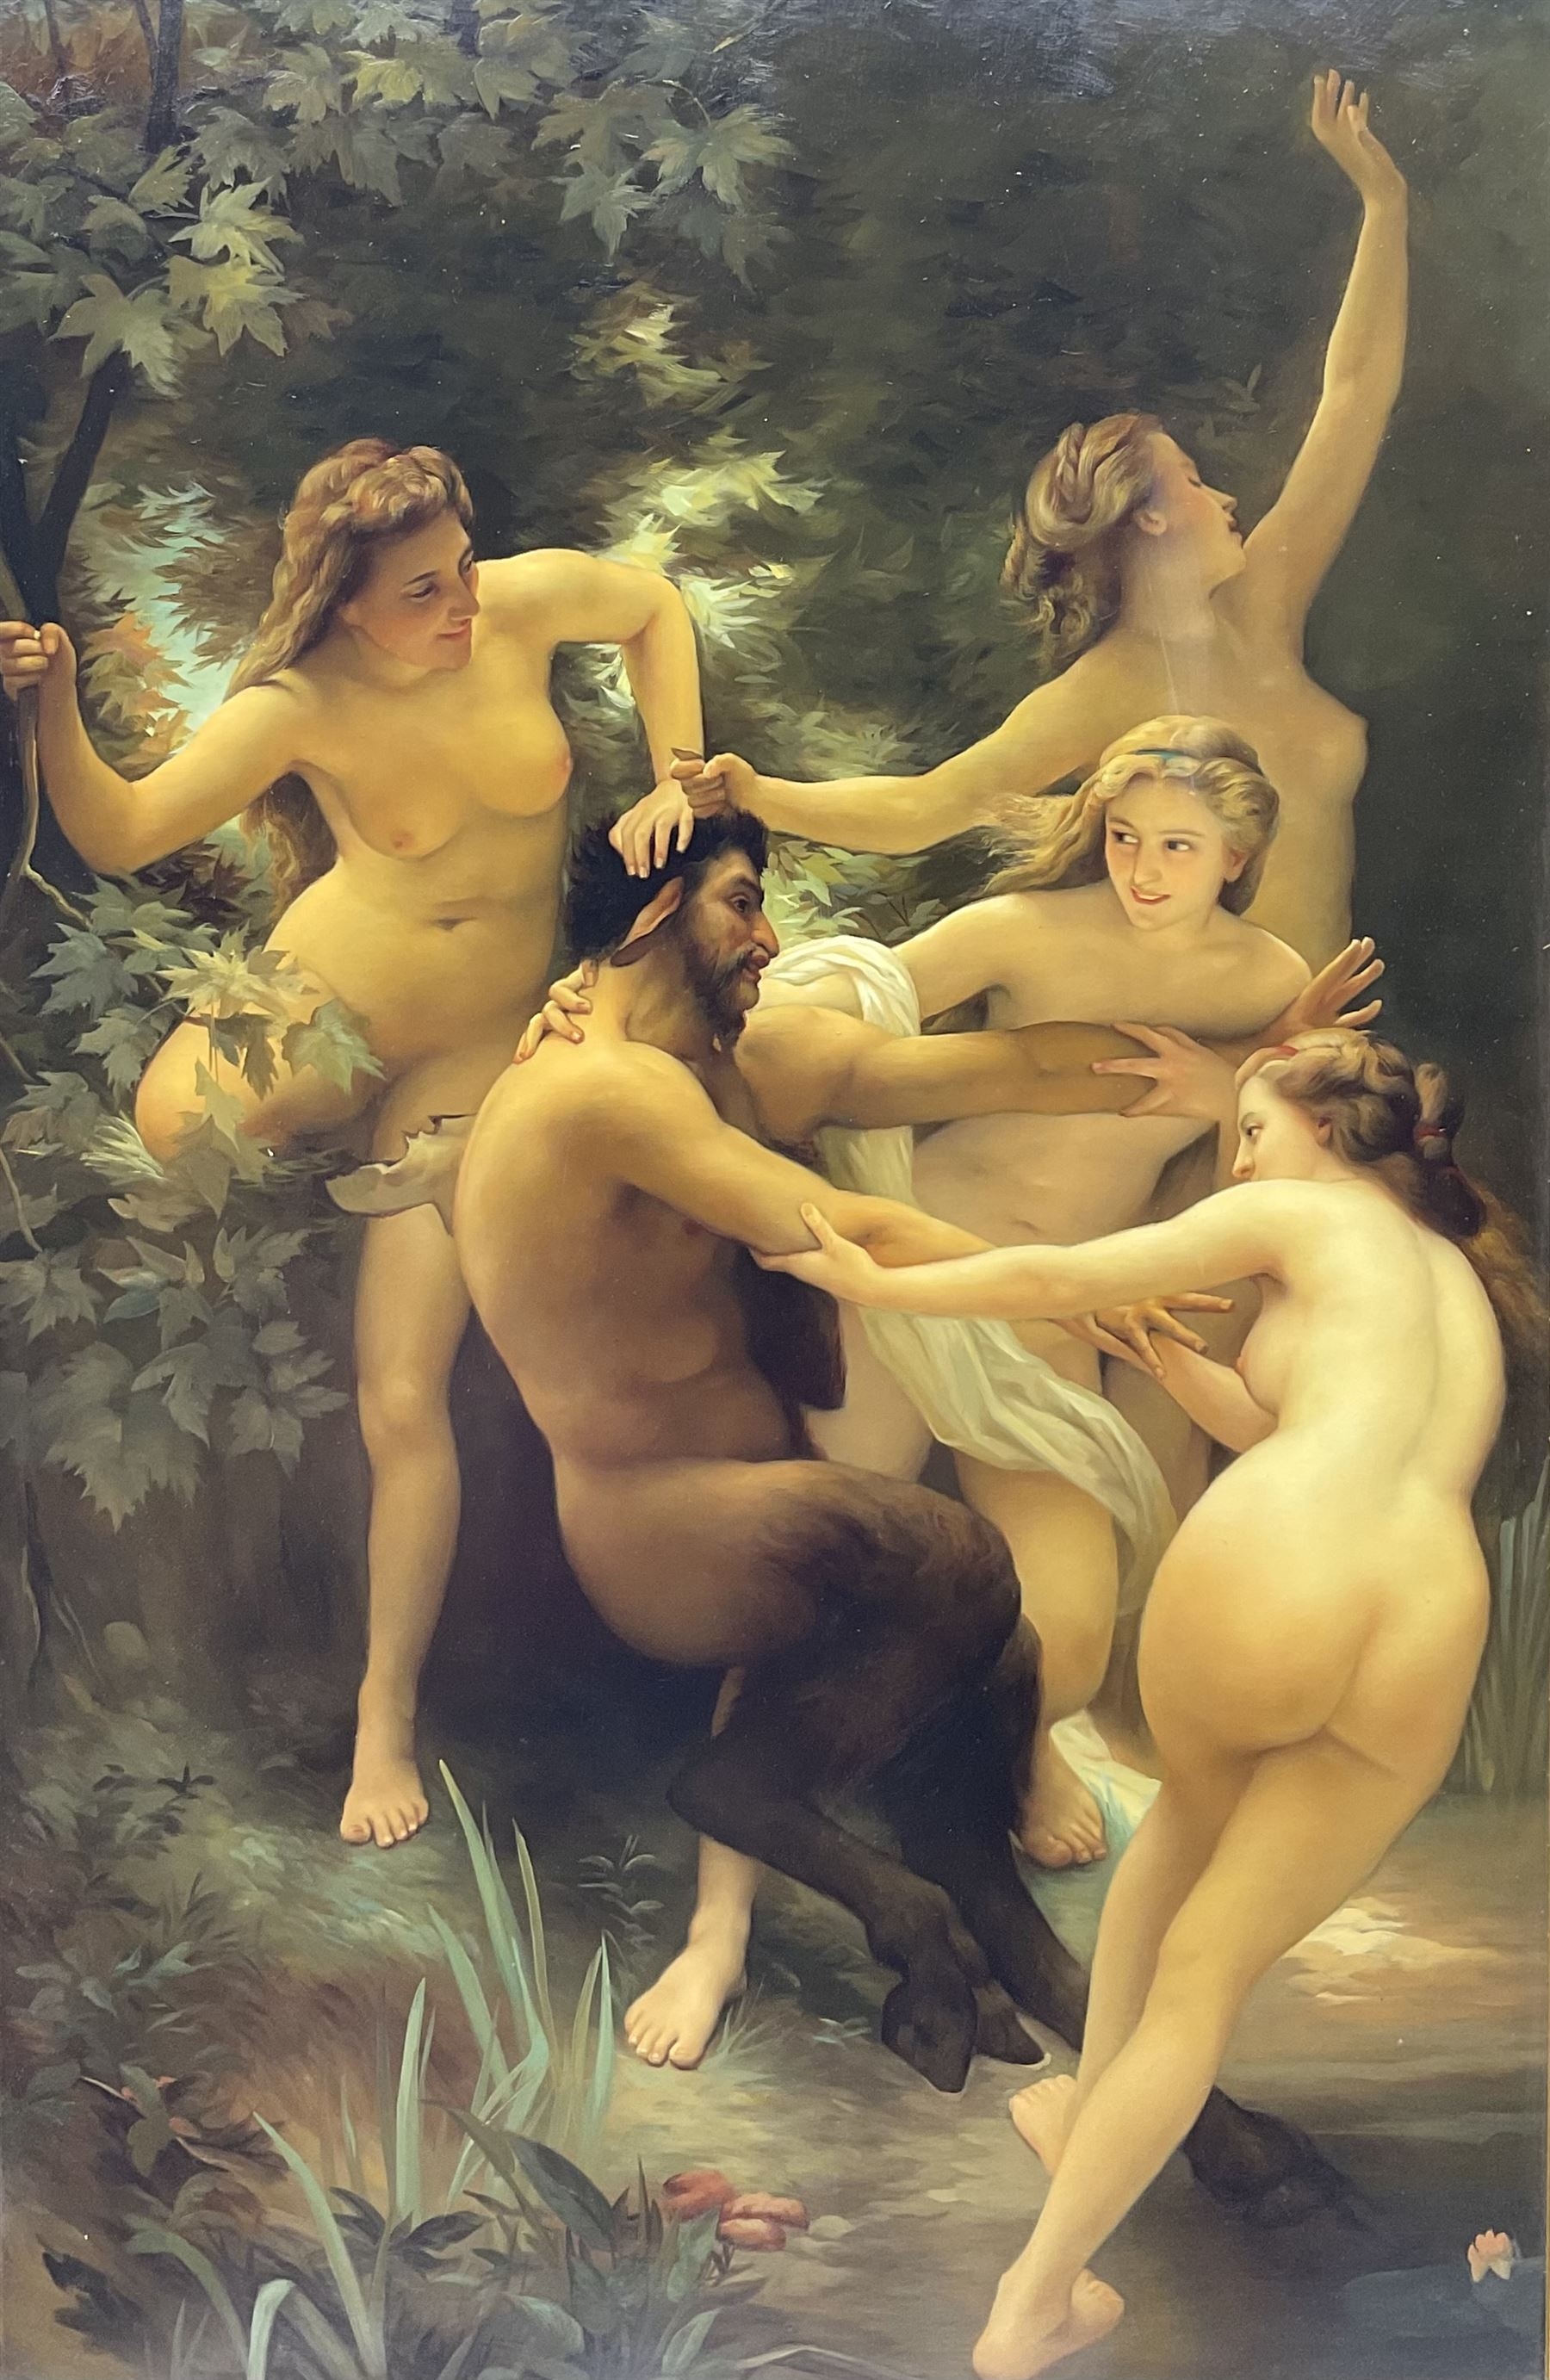 Artwork by William Adolphe Bouguereau, Nymphs and Satyr, Made of oil on board